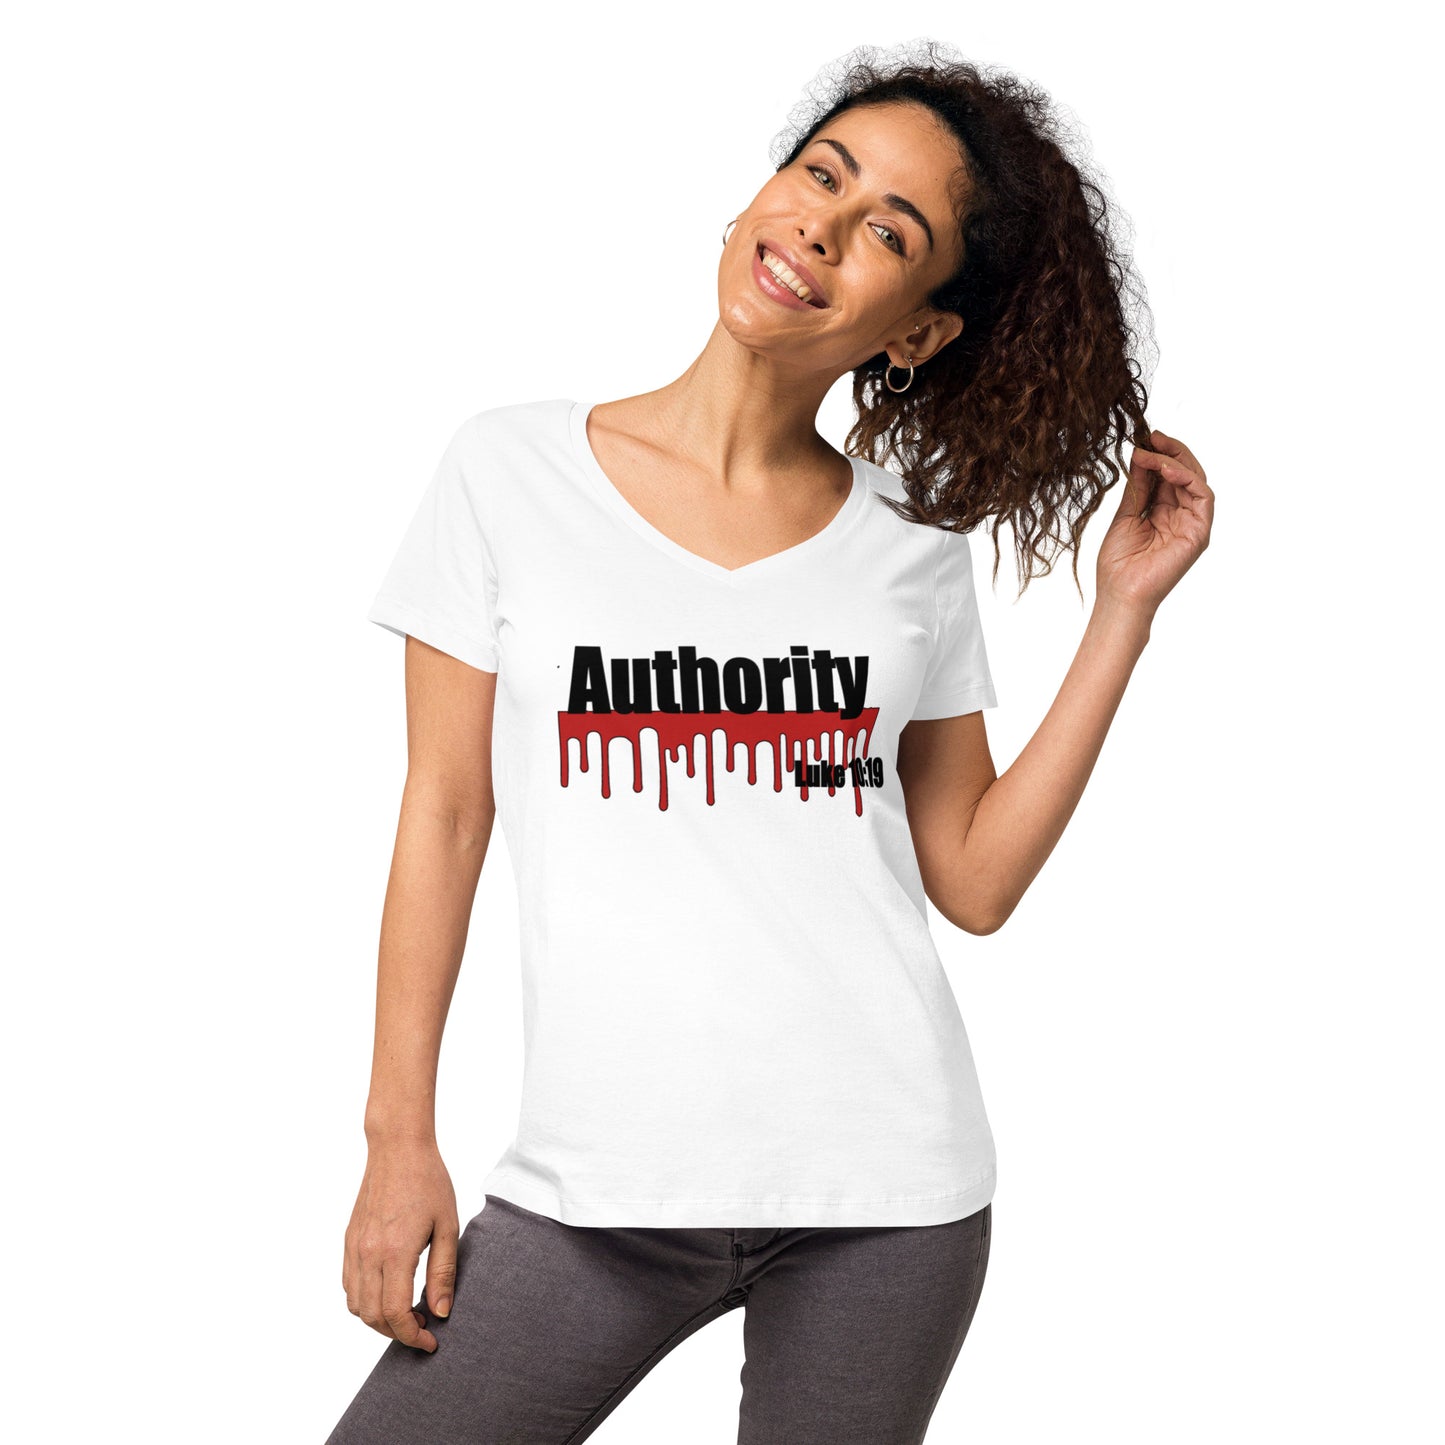 Authority Women’s fitted v-neck t-shirt